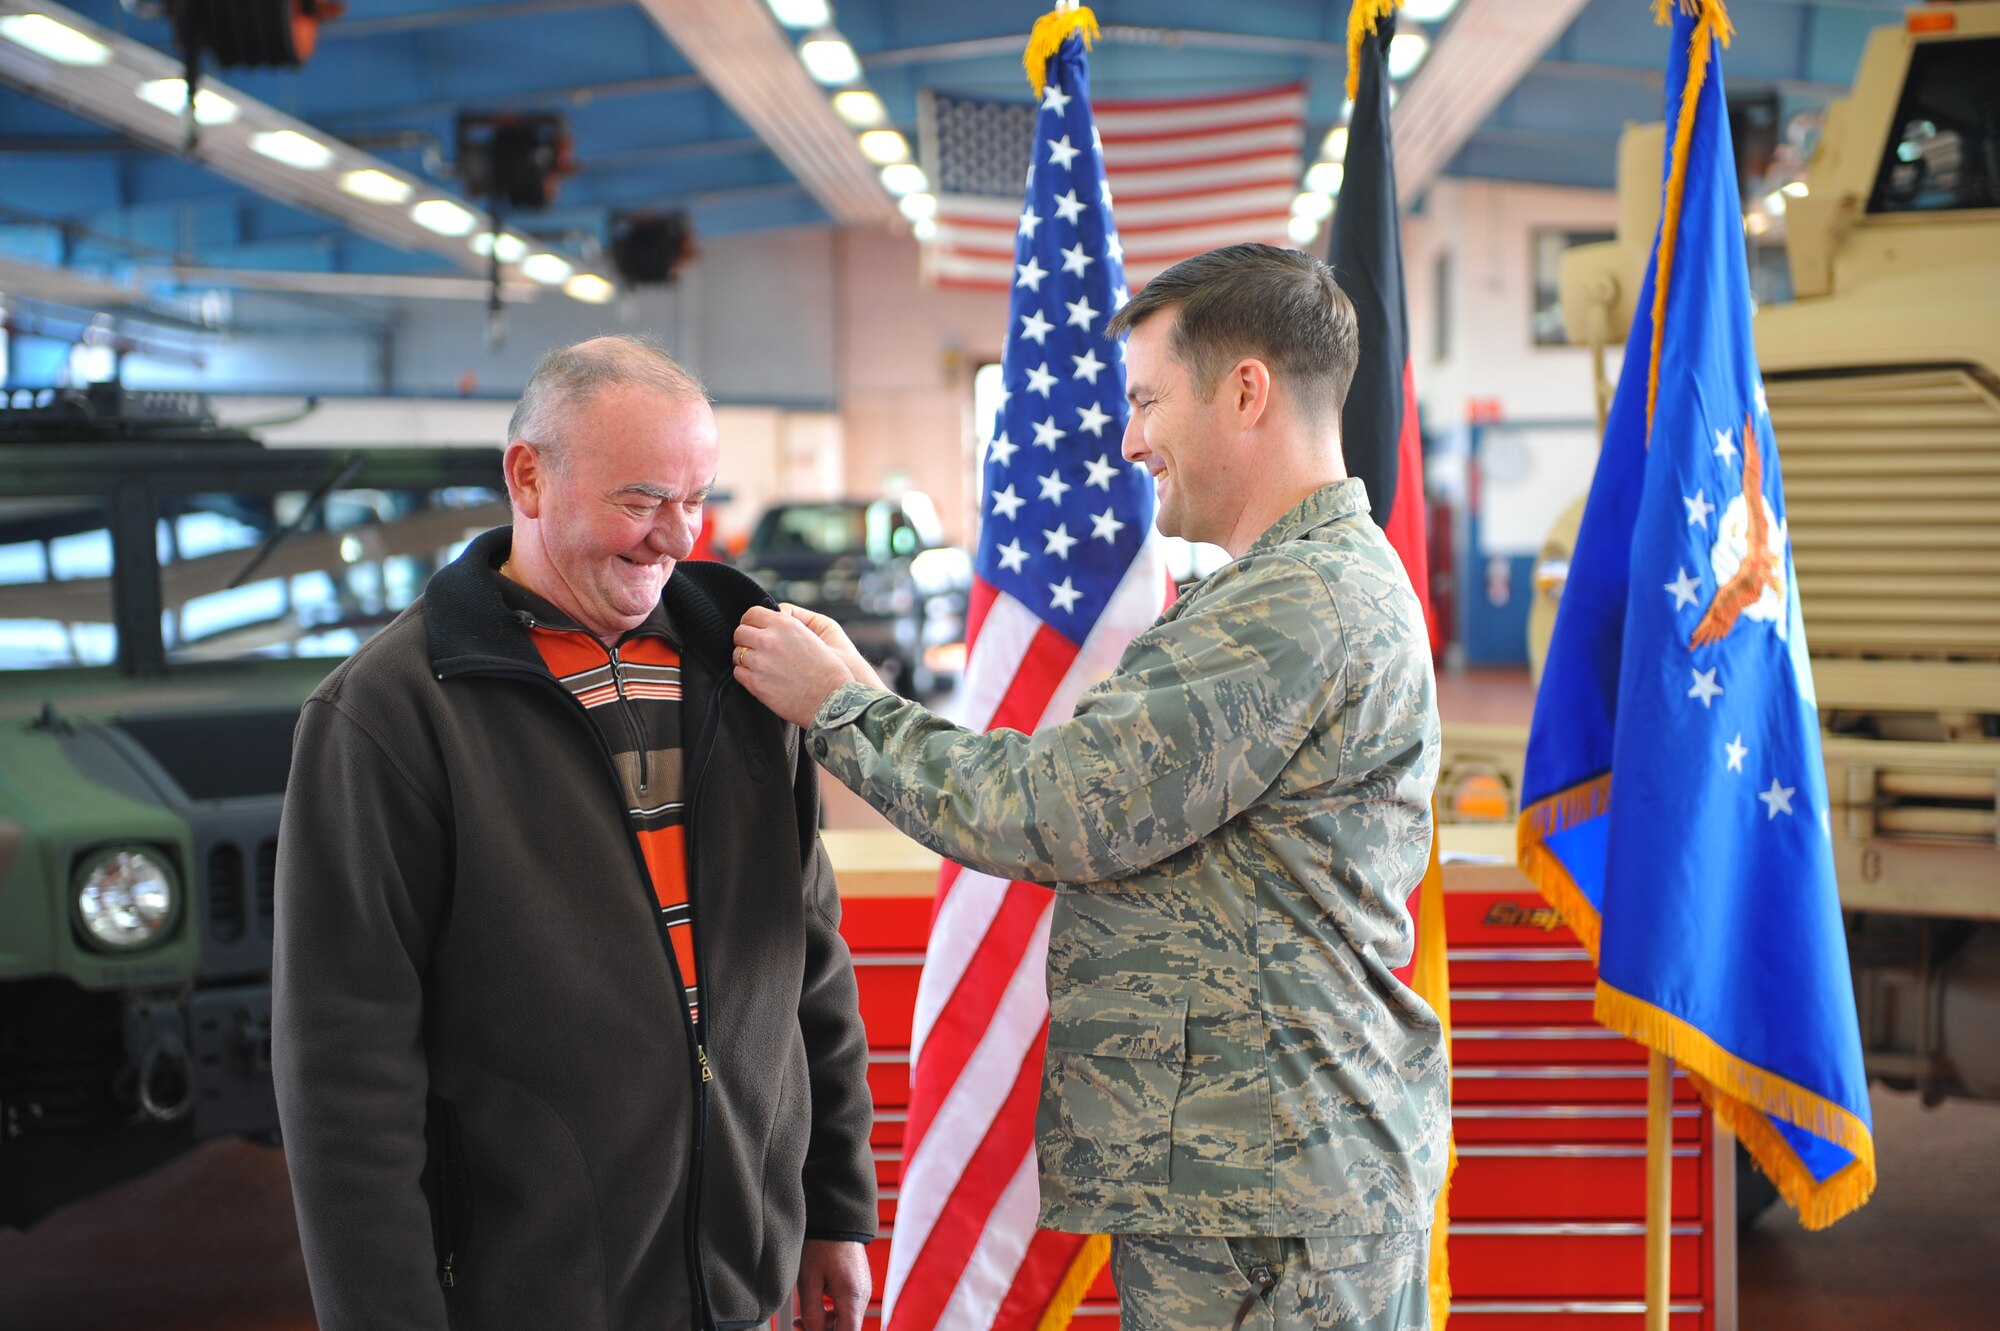 SPANGDAHLEM AIR BASE, Germany – Lt. Col. Jason Nulton, 52nd Logistics Readiness Squadron commander, places a civilian length of service pin on Mr. Hans Schinhofer, 52nd LRS lead vehicle operator, during a pinning ceremony inside Bldg. 110 here March 9. The ceremony honored Schinhofer for his 35 years of service to Spangdahlem AB. Distinguished visitor Chief Master Sgt. Billy Davis, vehicle operations career field manager, took time to participate in the ceremony, as well as to discuss upcoming changes in the career field and answer questions. (U.S. Air Force photo by Airman 1st Class Dillon Davis/Released)